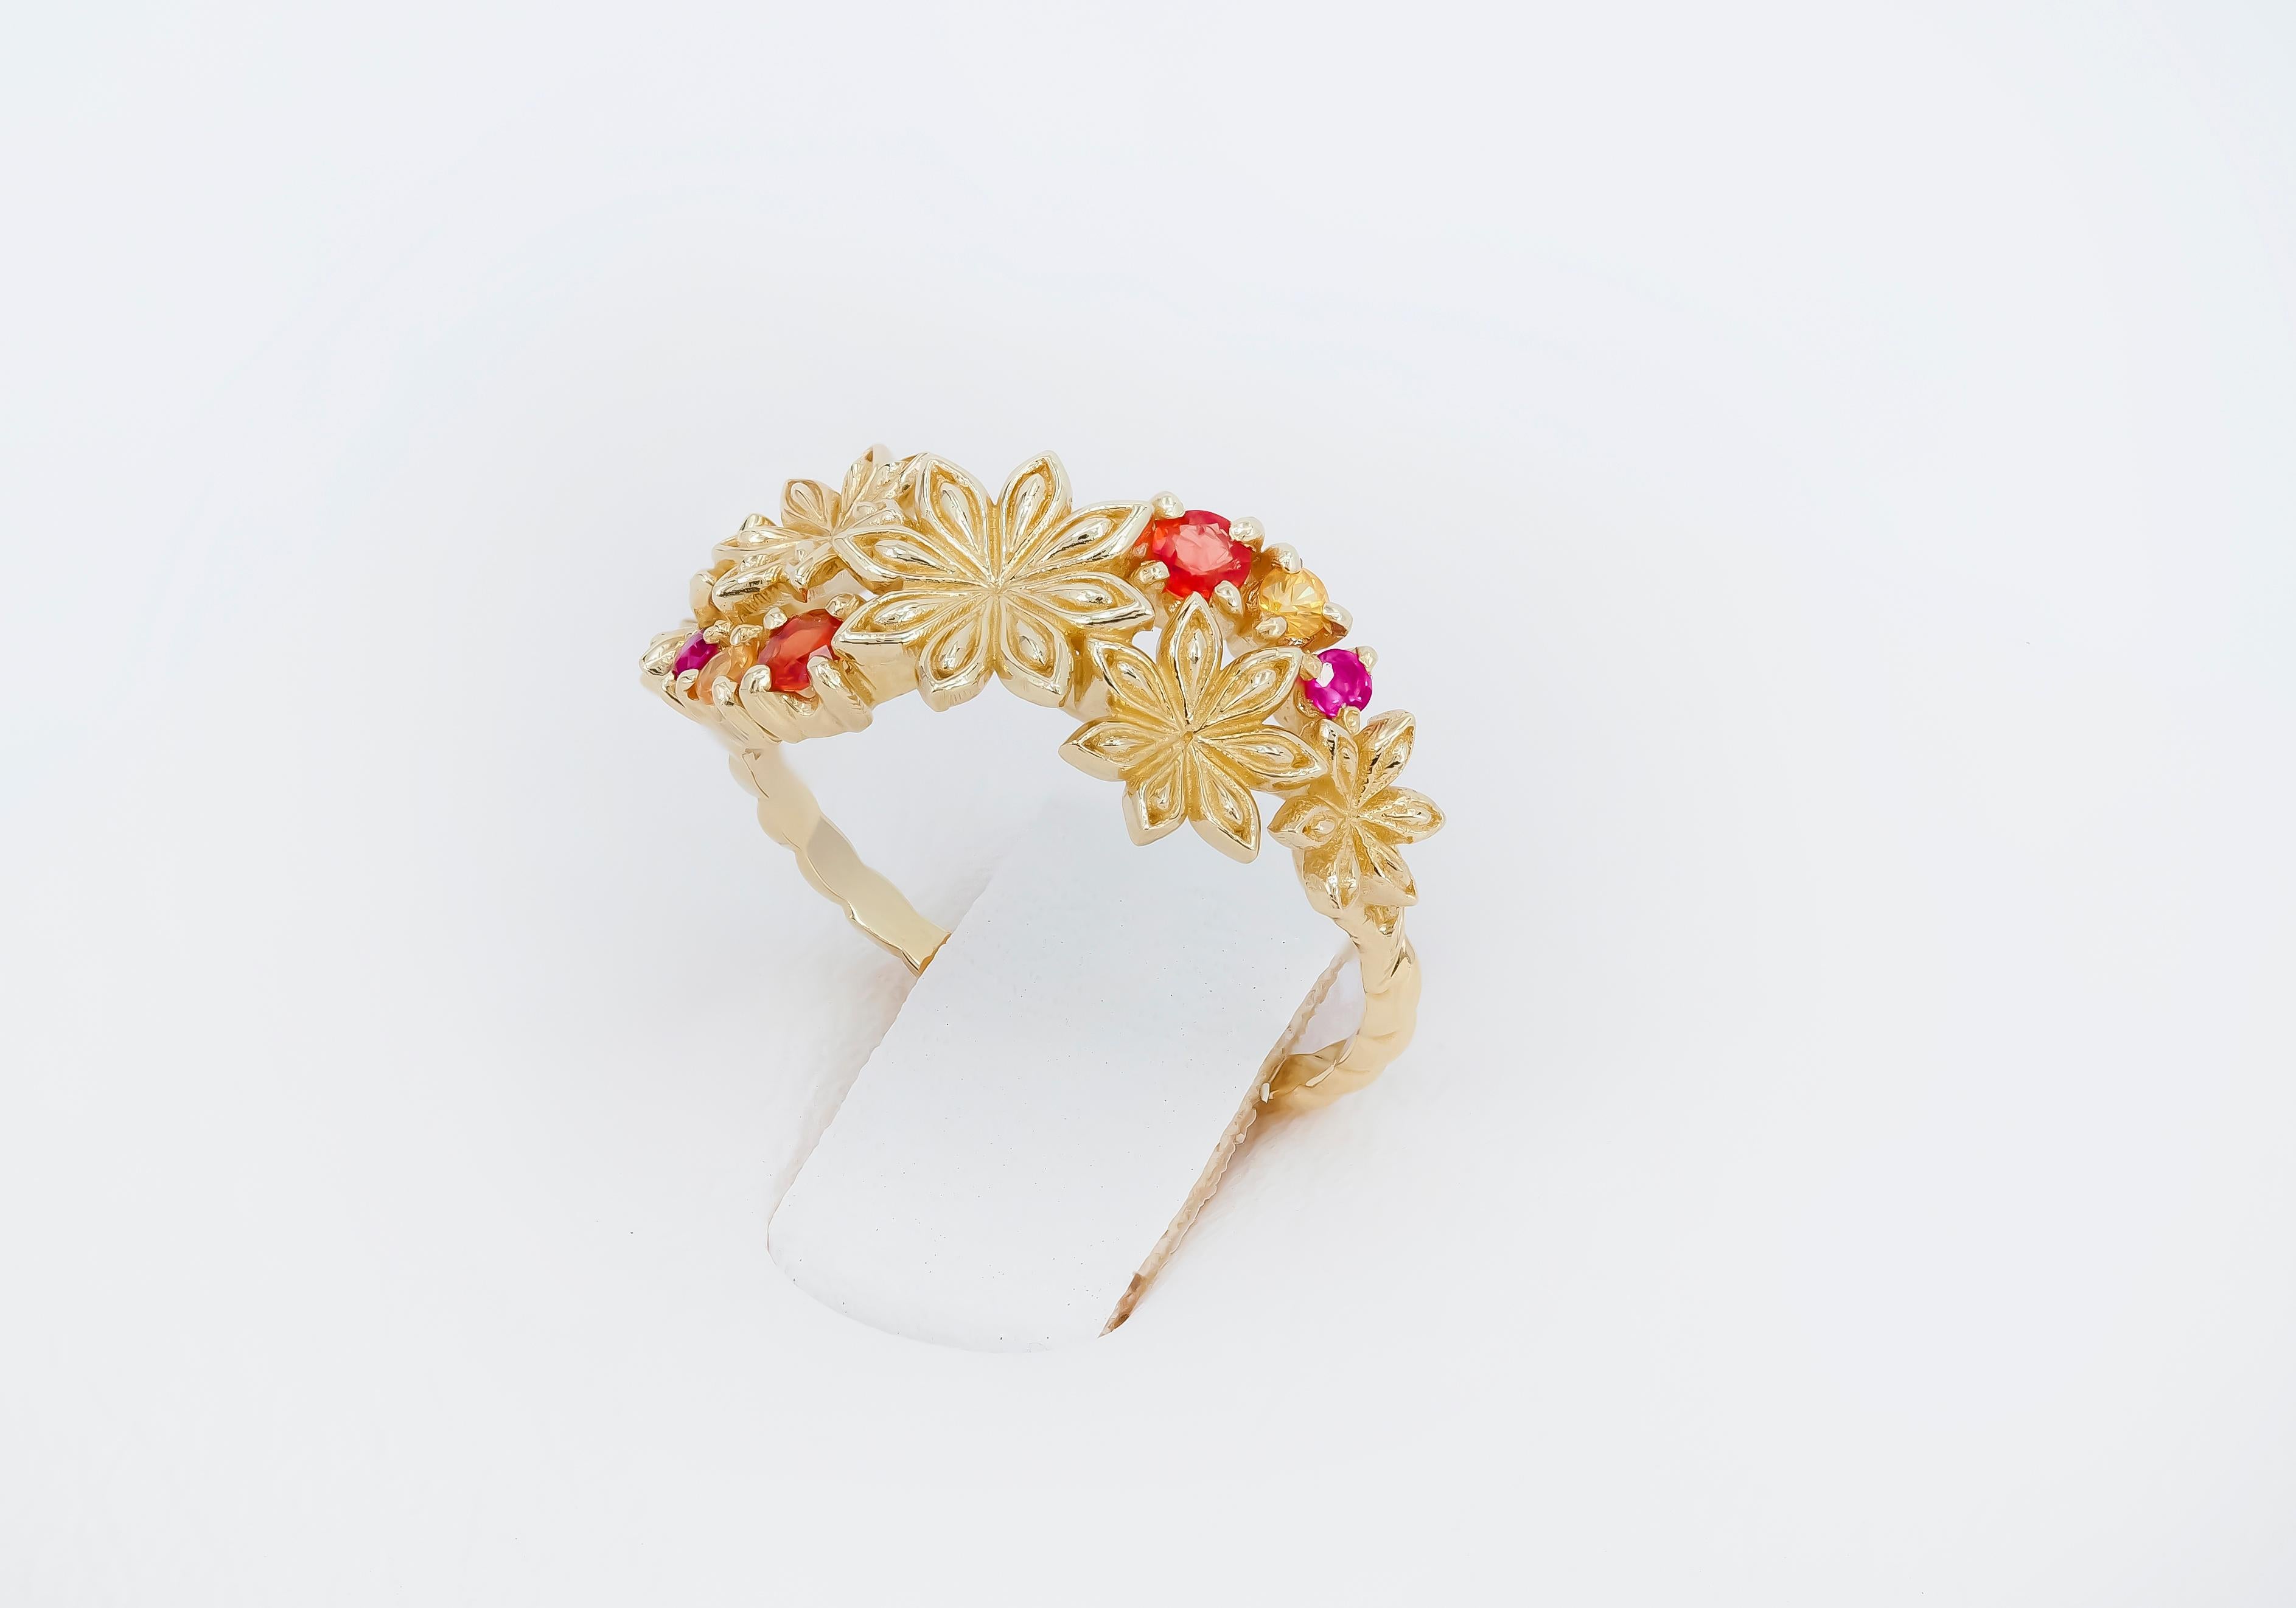 For Sale:  14k Gold Ring with Sapphires and Amethysts, Star Anise Flower Gold Ring. 7